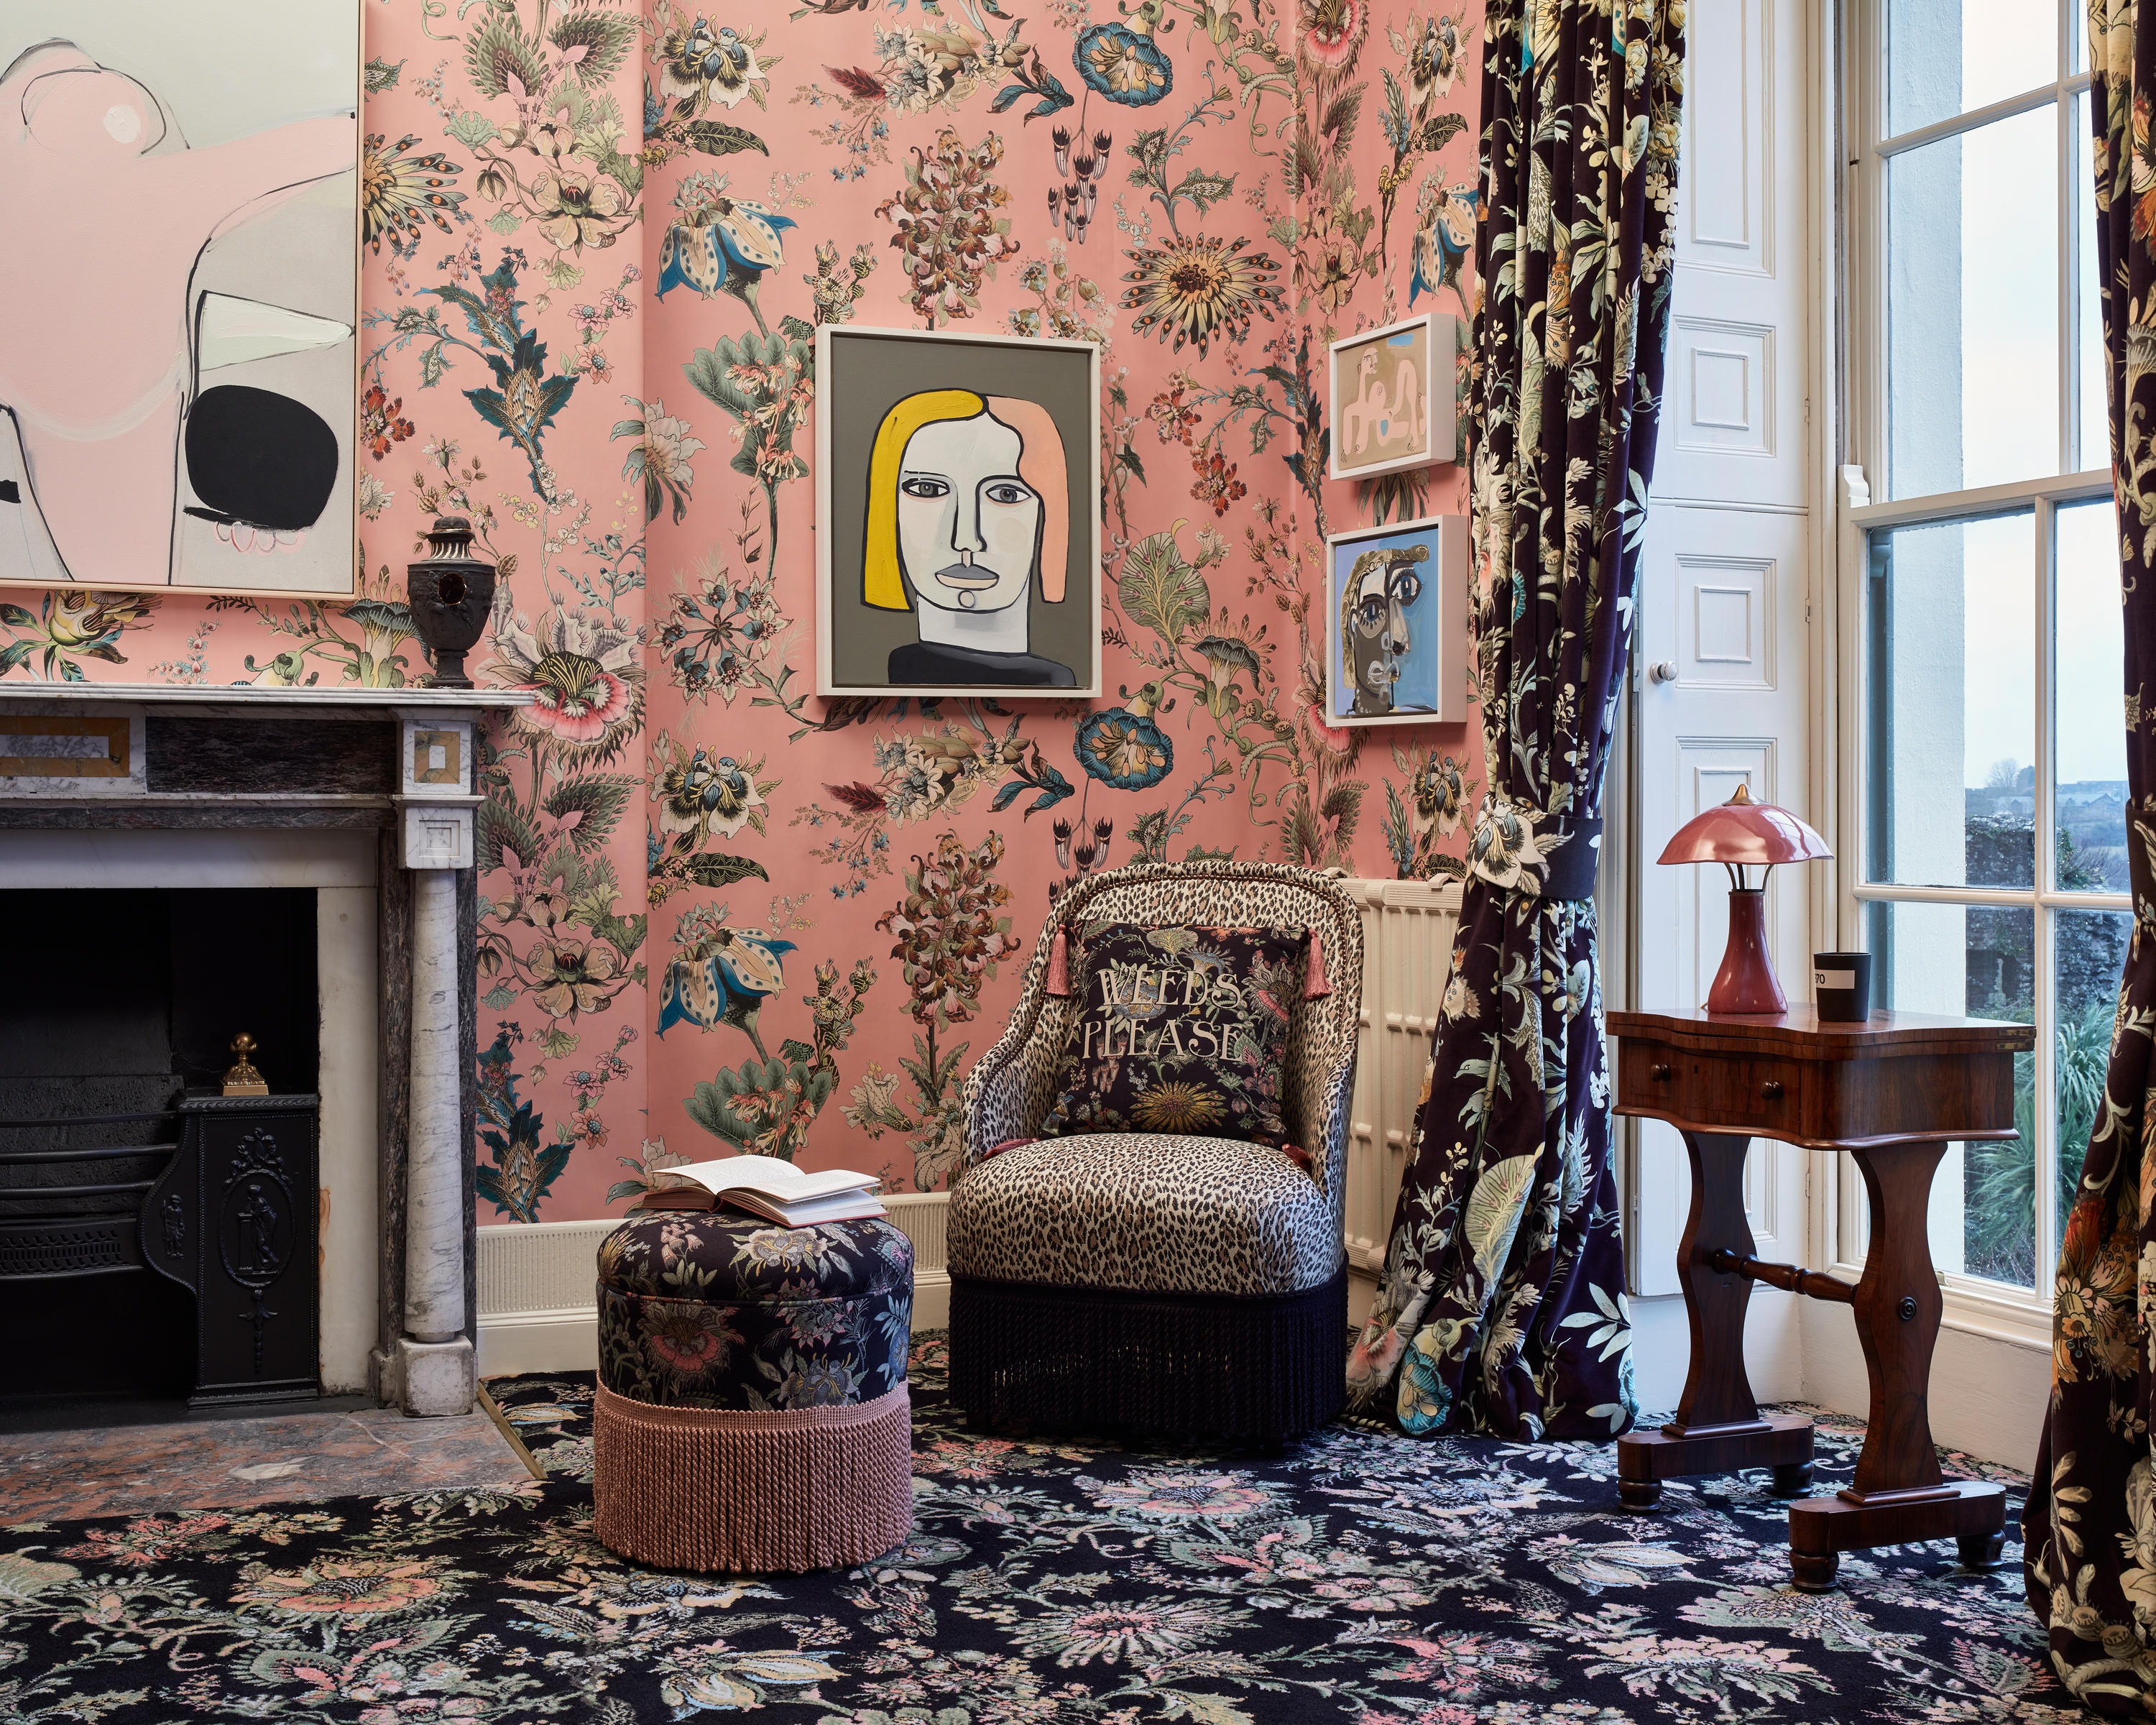 House of Hackneys Collaboration With Cult Wallpaper Brand Zuber Arrives at  Bergdorf Goodman